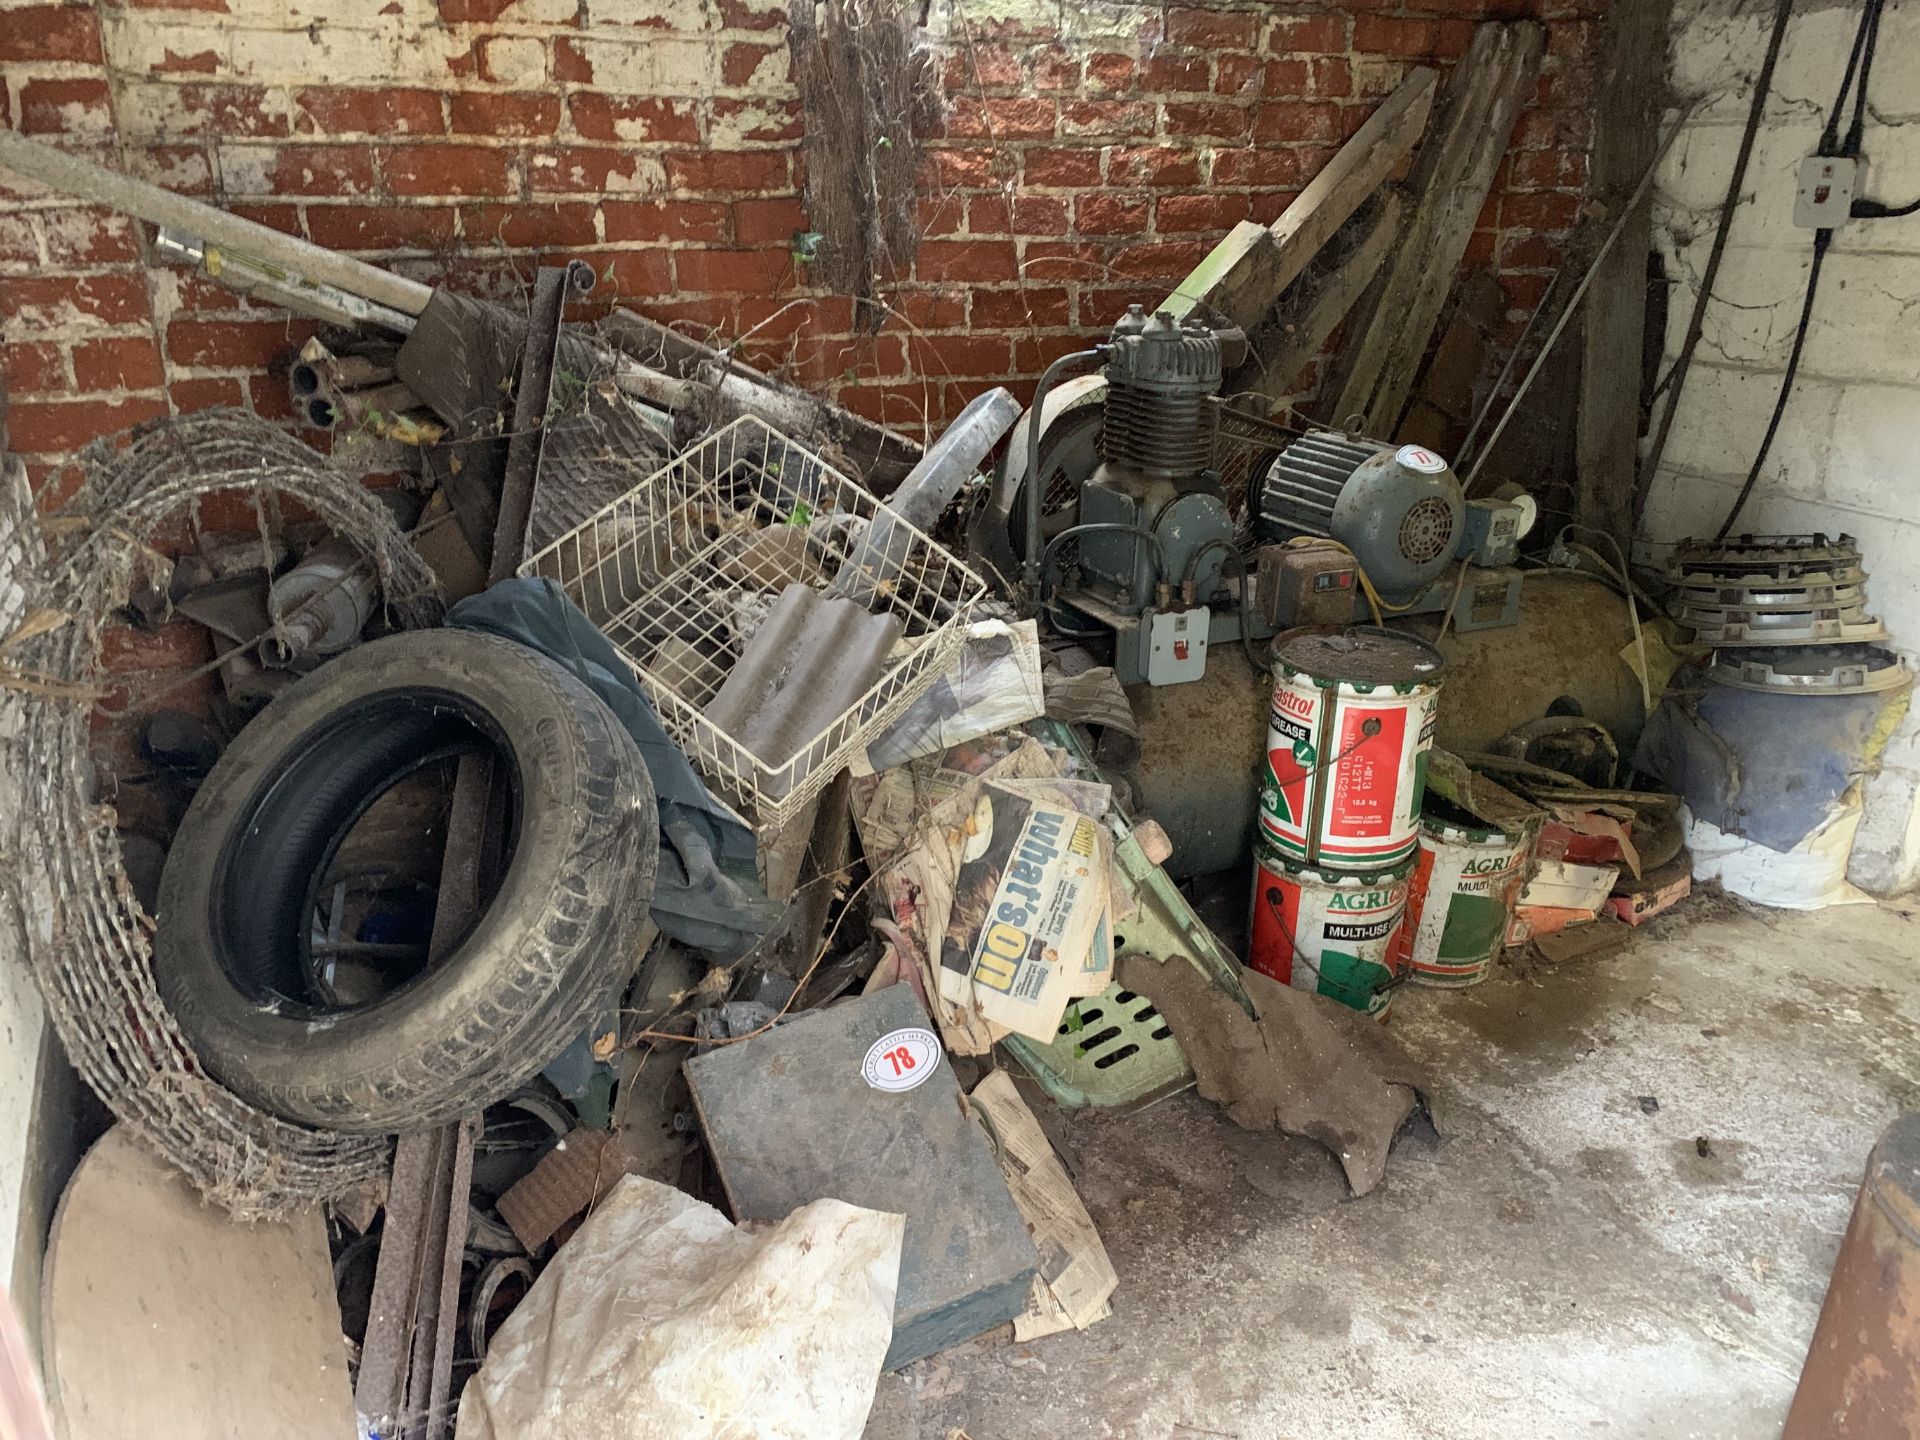 Contents of shed excluding compressor